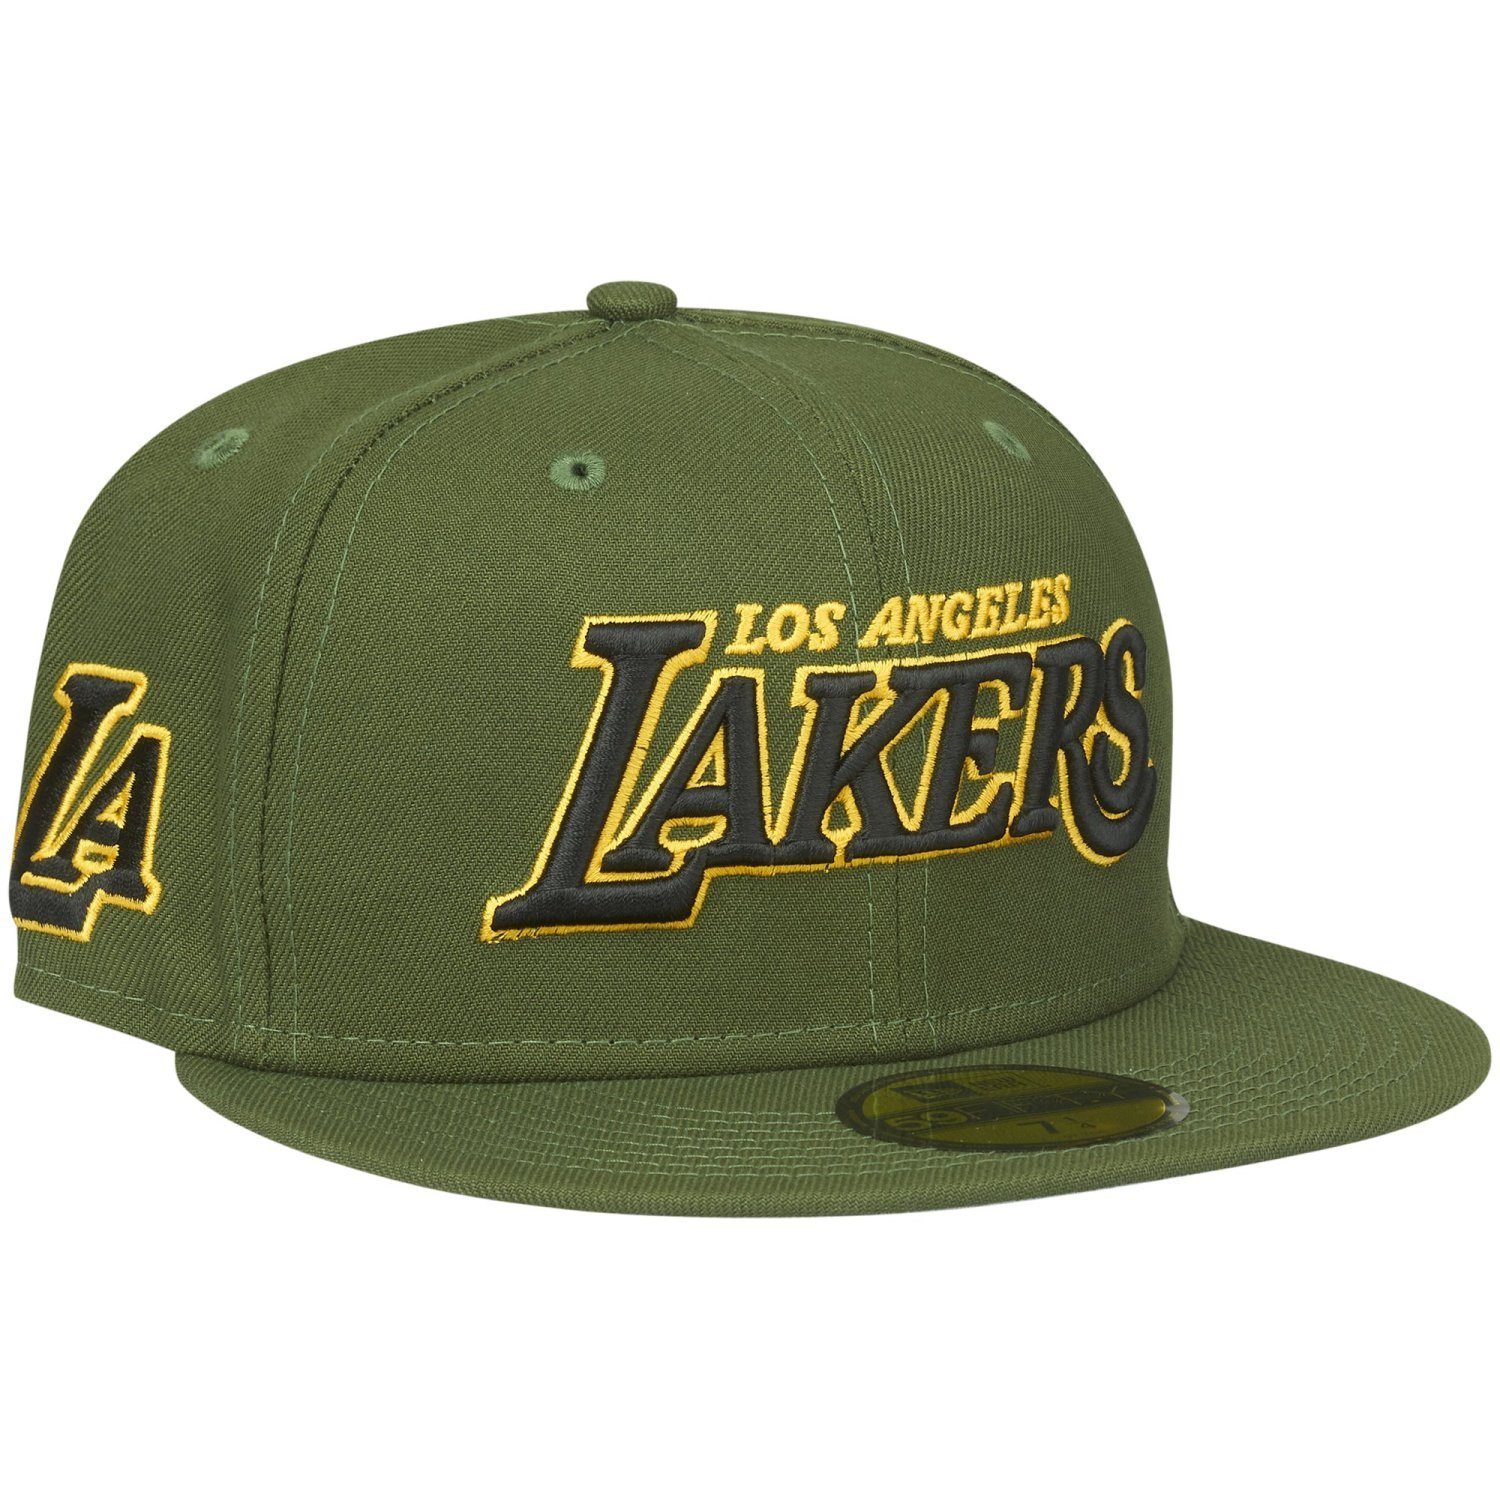 New Era Fitted Cap 59Fifty Los Angeles Lakers olive | Fitted Caps